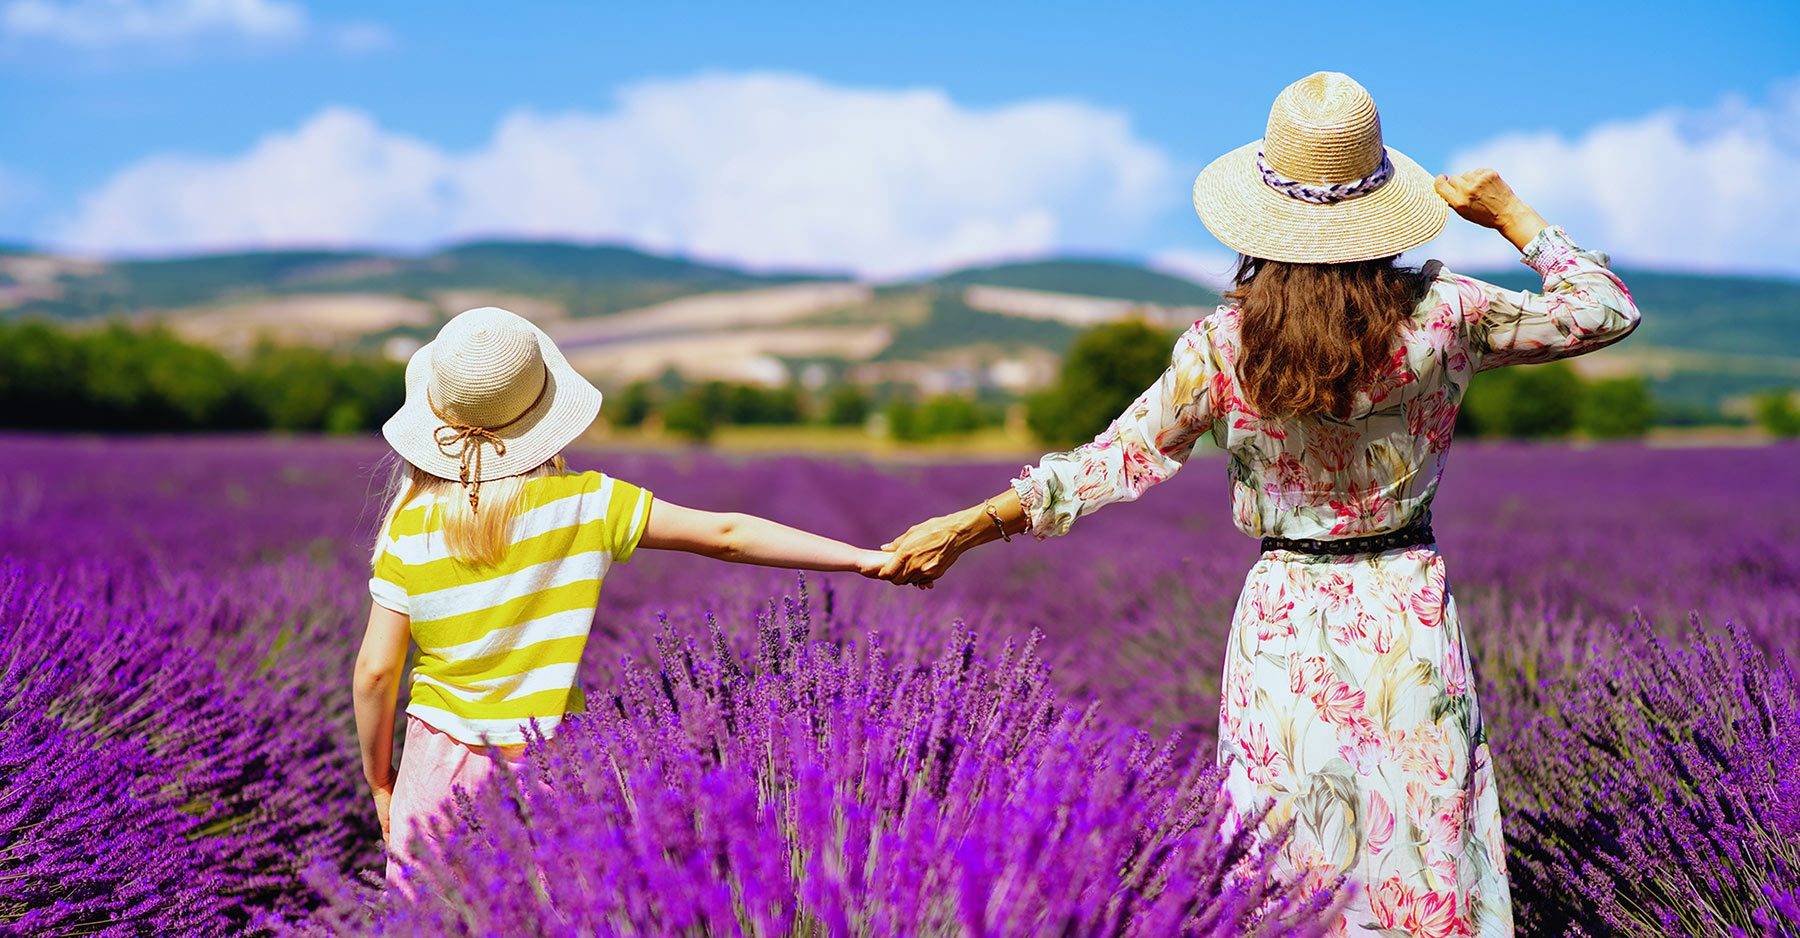 a litte girld and a woman into lavender fields